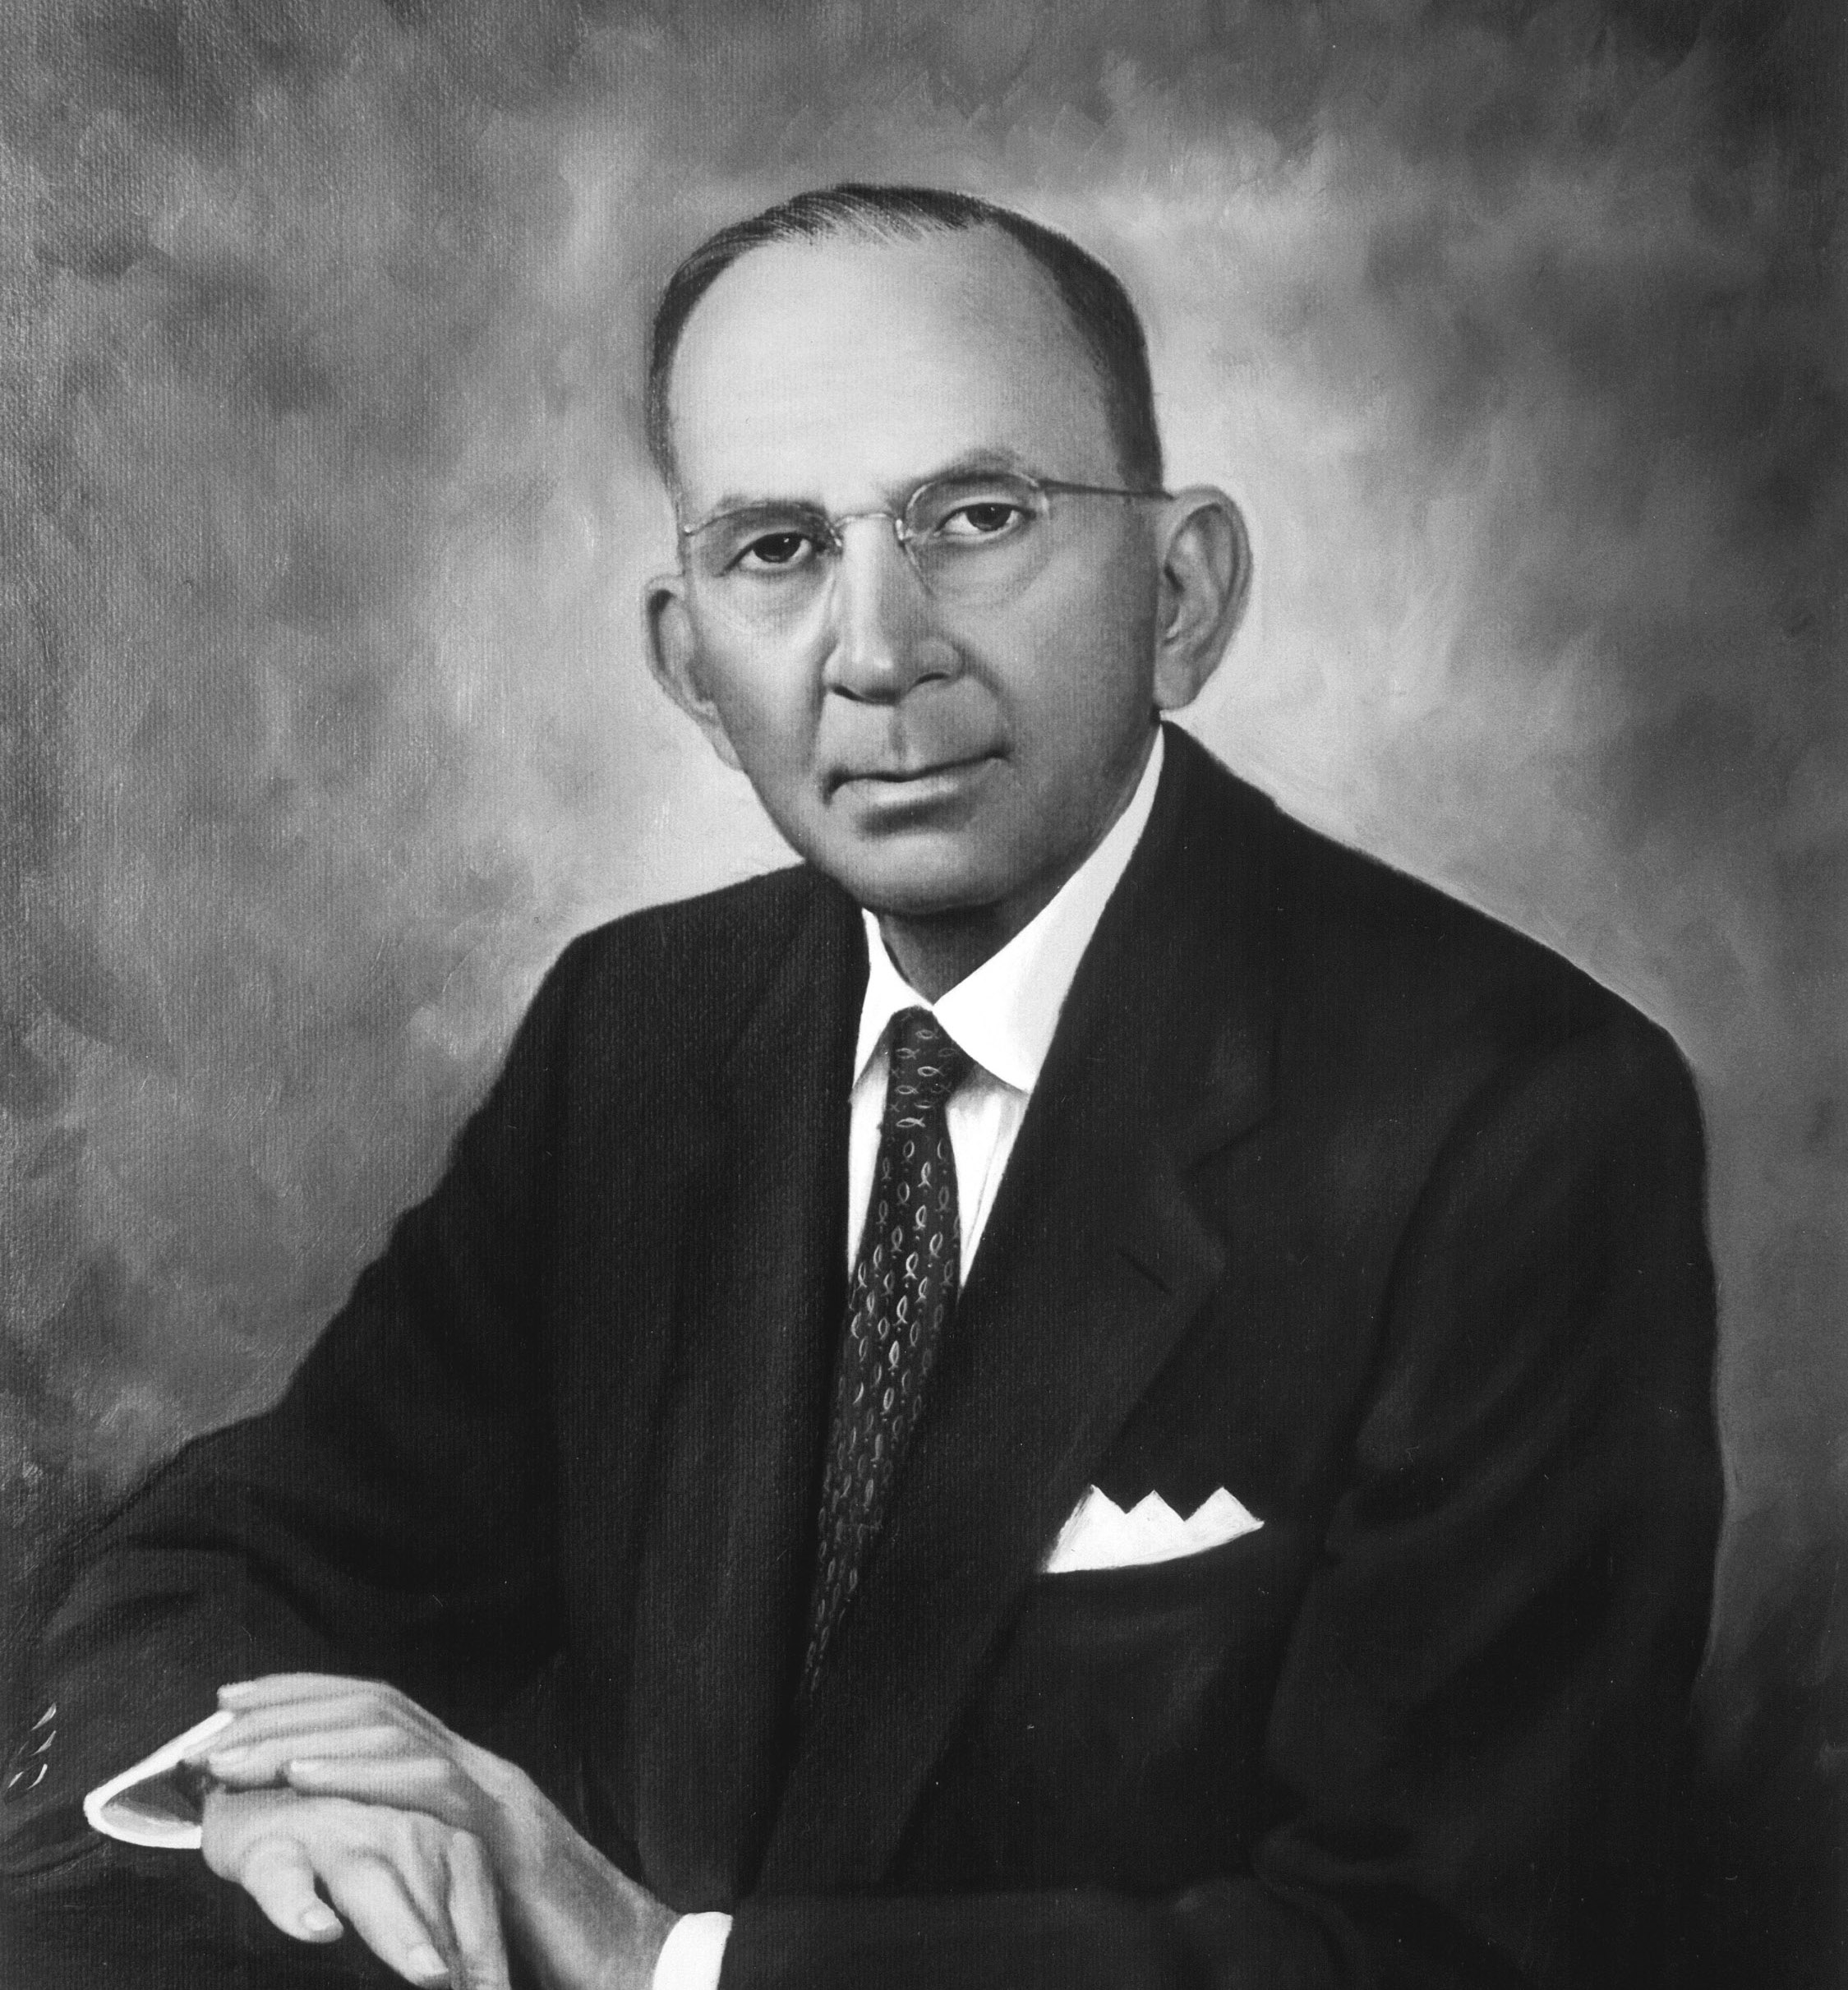 John B. Sloan Jr., a founder of Countybank, pictured in a black-and-white image from the 1930s.